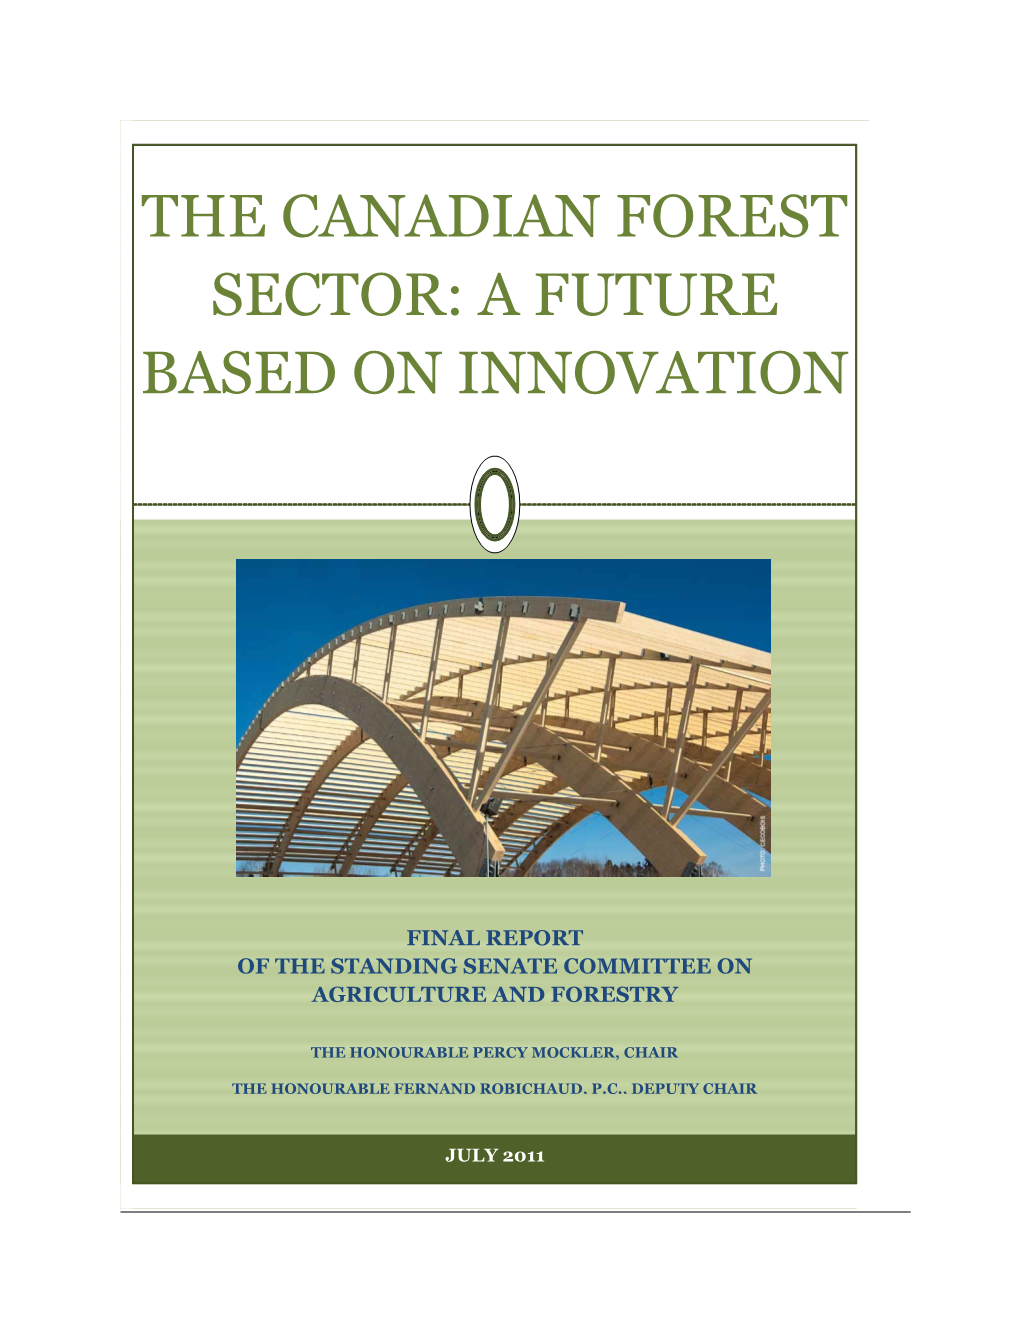 The Canadian Forest Sector: a Future Based on Innovation”